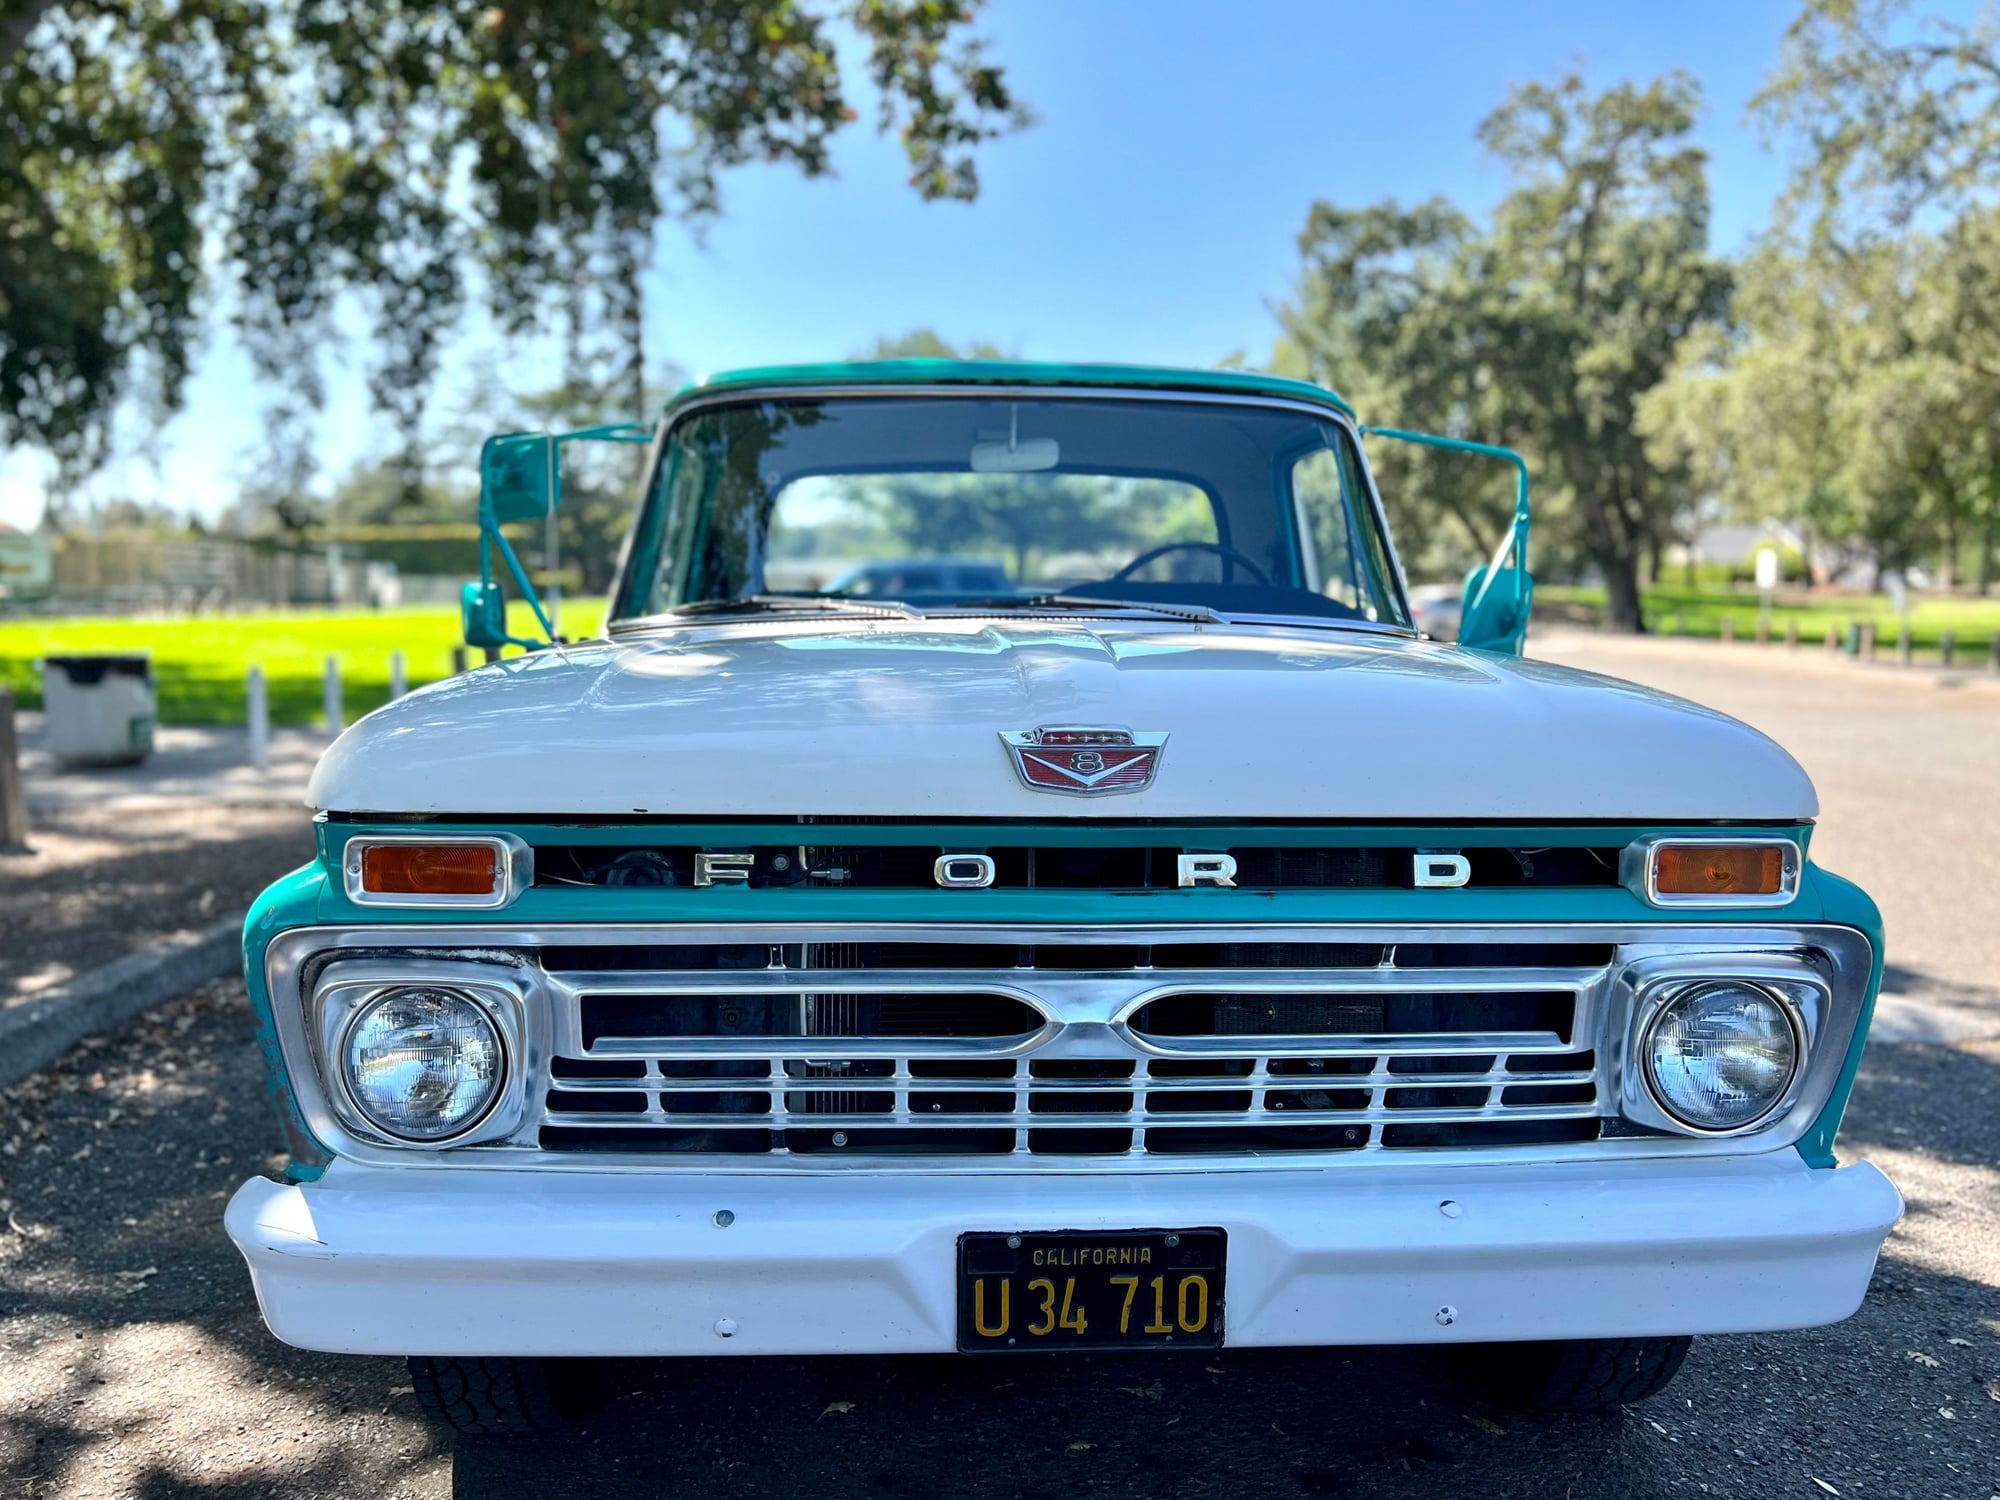 1966 Ford F-100 - 1966 Ford F100 390 V8 automatic - Used - VIN F10YR832052 - 1,000 Miles - 8 cyl - 2WD - Automatic - Truck - Other - Chico, CA 95973, United States